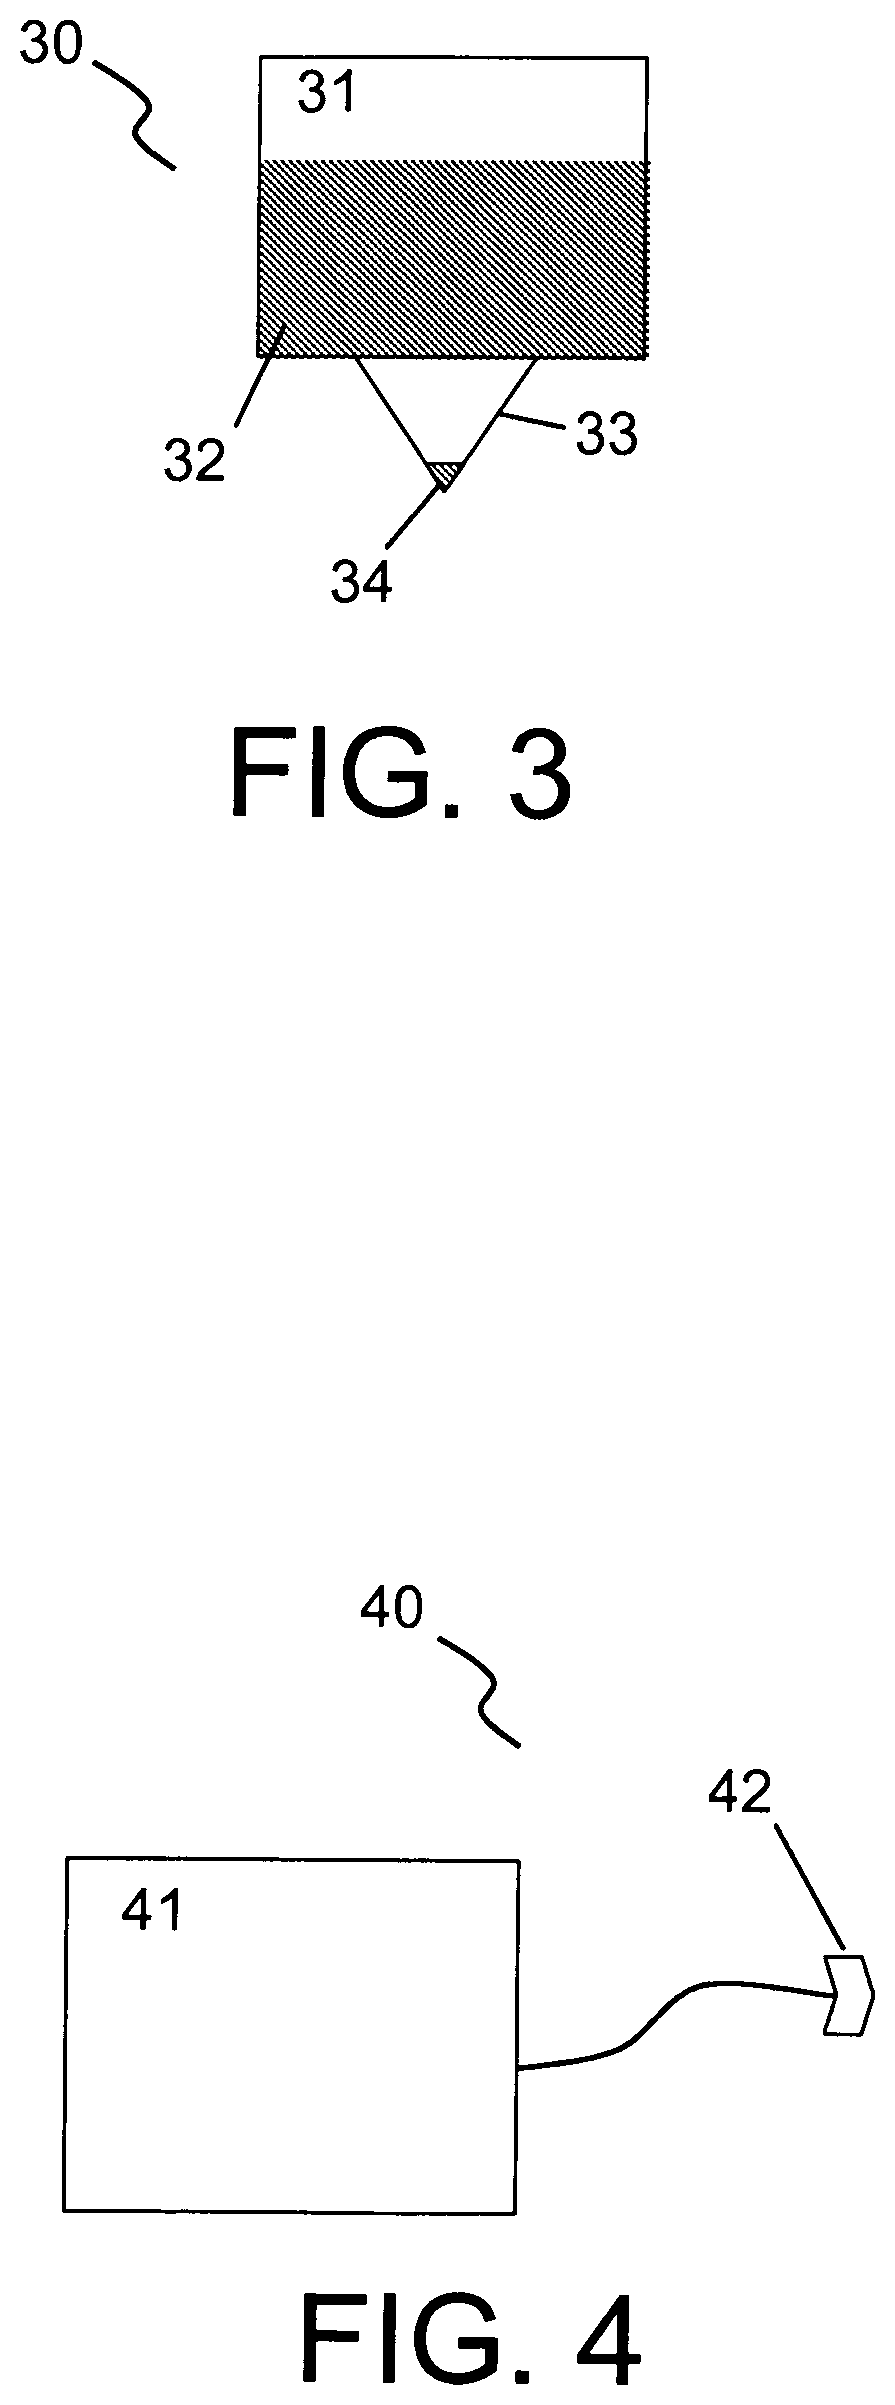 Photonic probe apparatus with integrated tissue marking facility